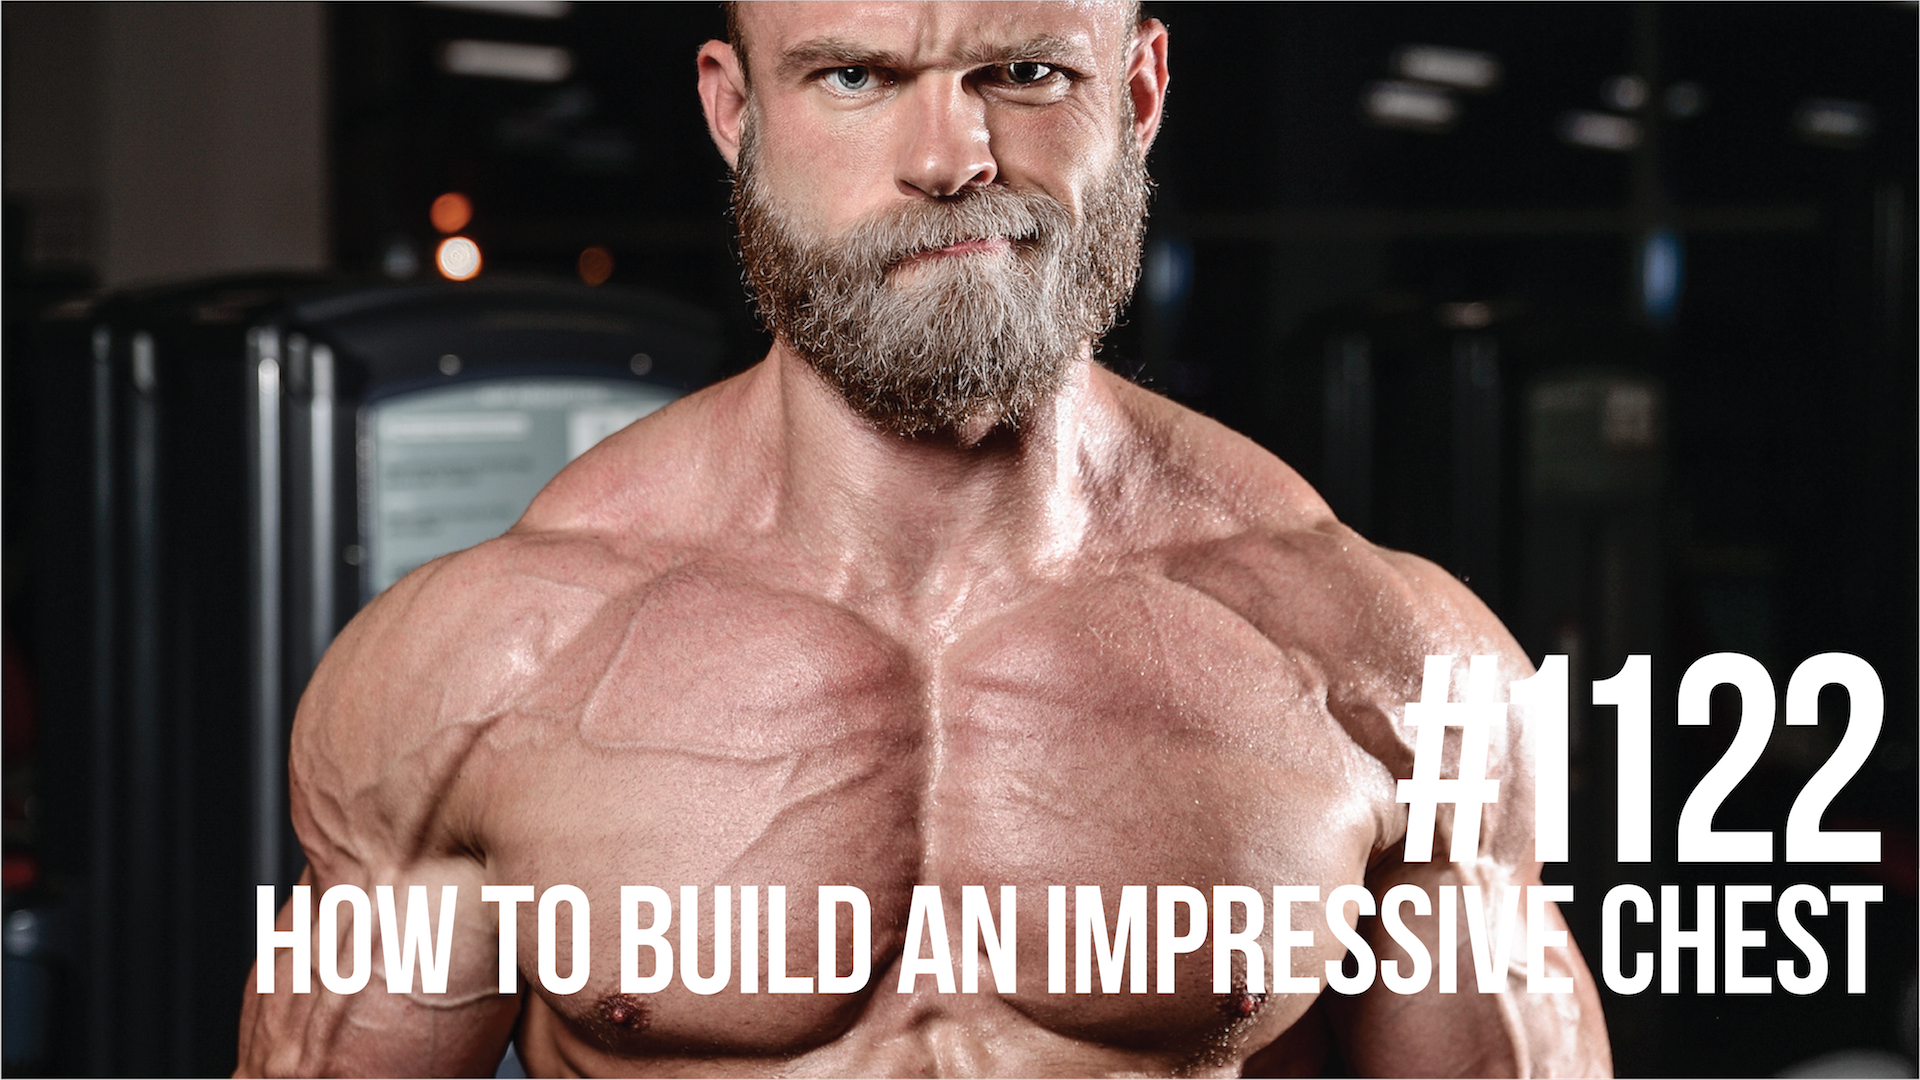 1122: How to Build an Impressive Chest